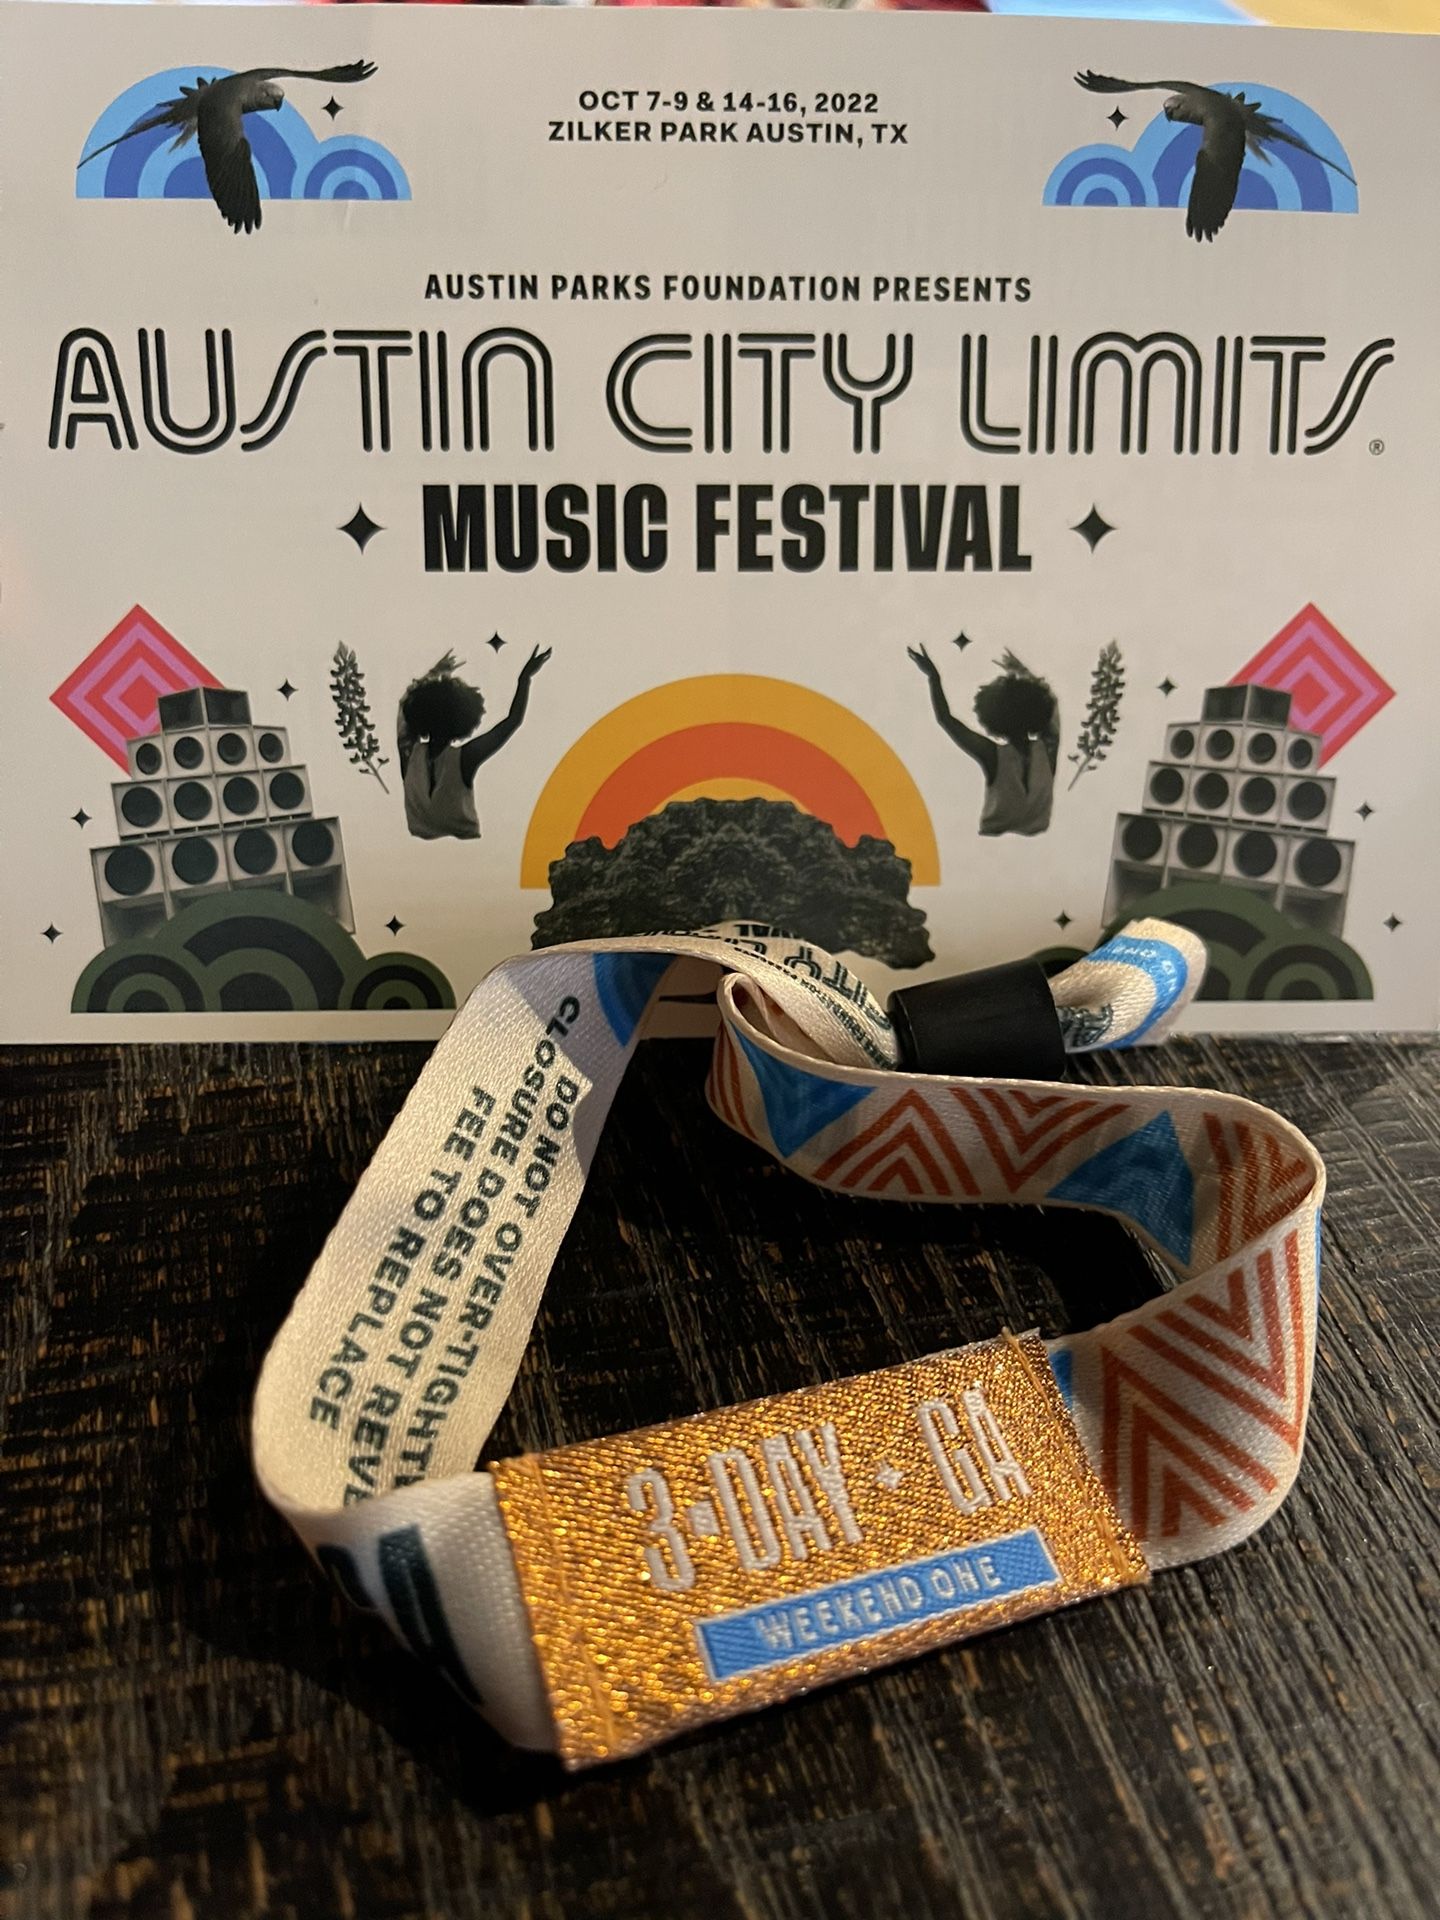 ACL Weekend 1